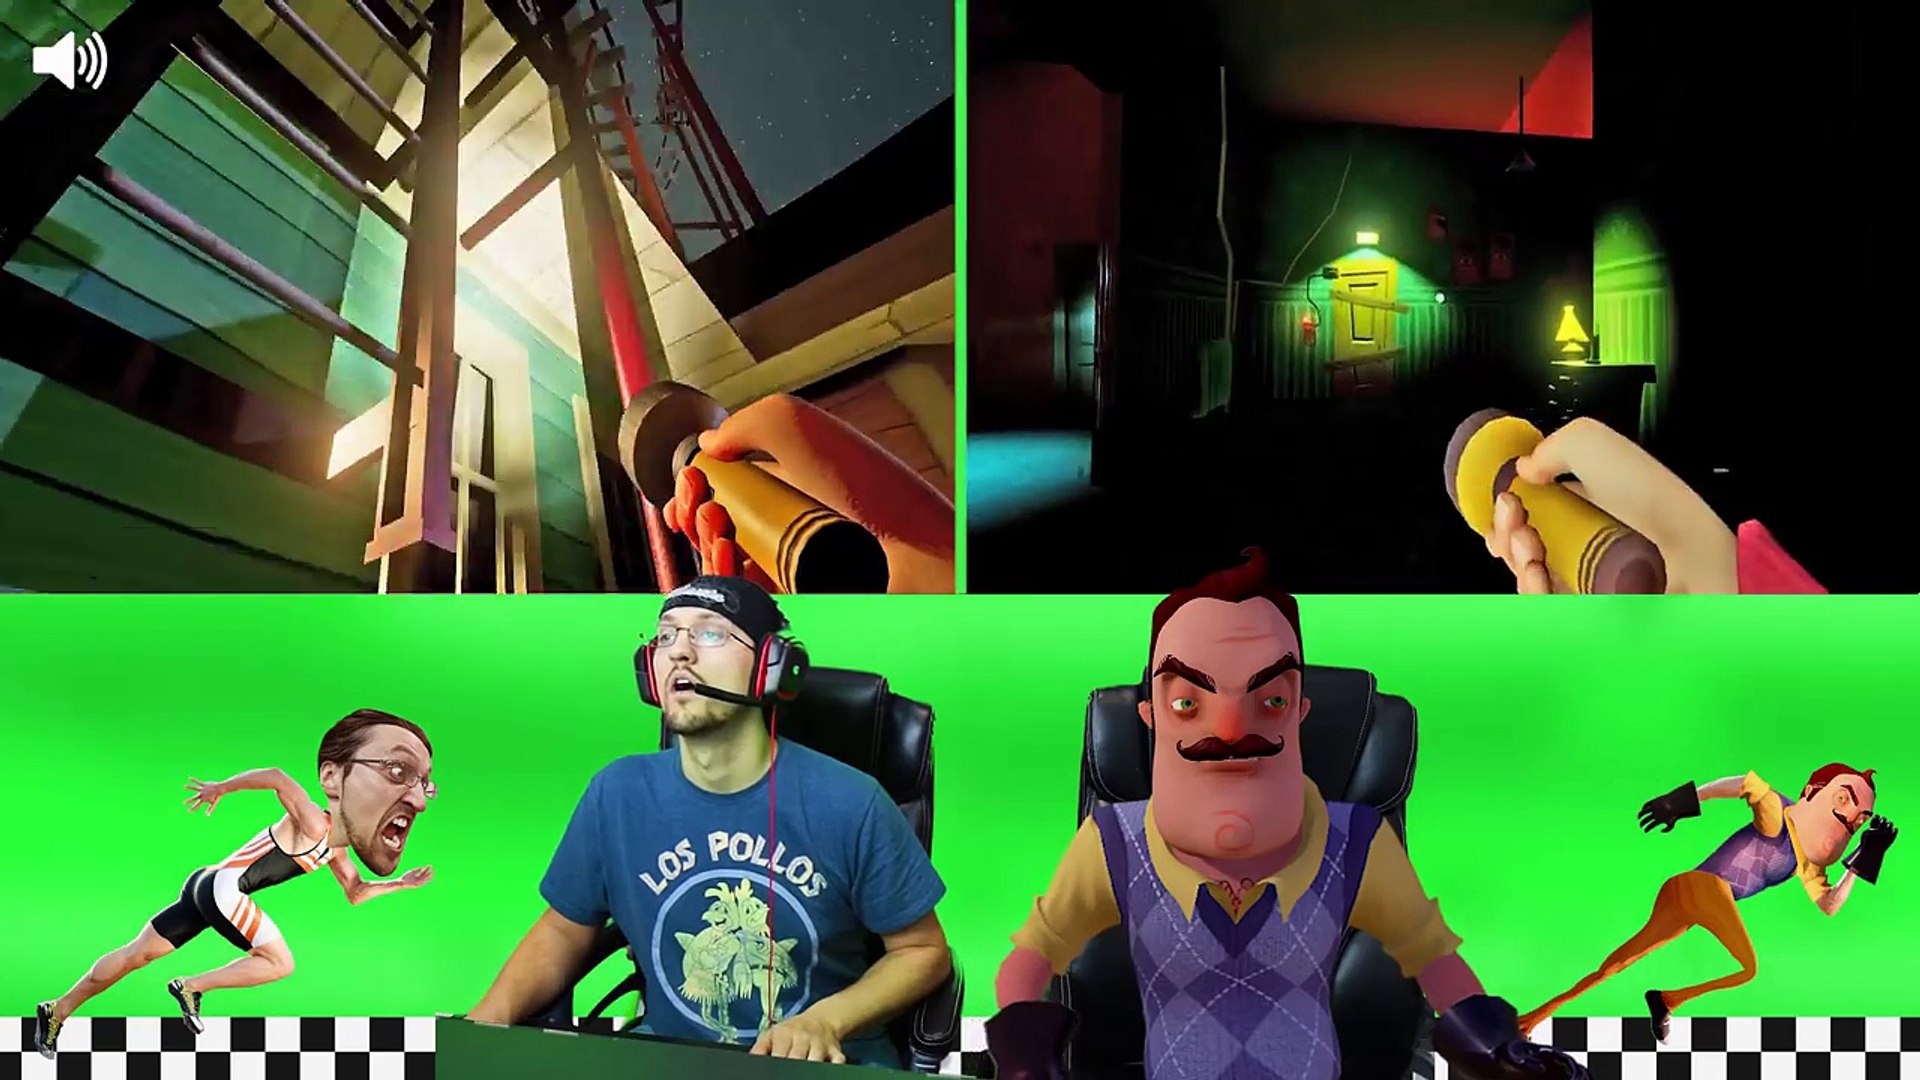 Hello Neighbor Vs Me Basement Race Challenge Irl Gaming Alpha 3 Secrets Revealed Fgteev Part 9 7bxk6y5qy9s Video Dailymotion - videos matching hello neighbor roblox video game play revolvy